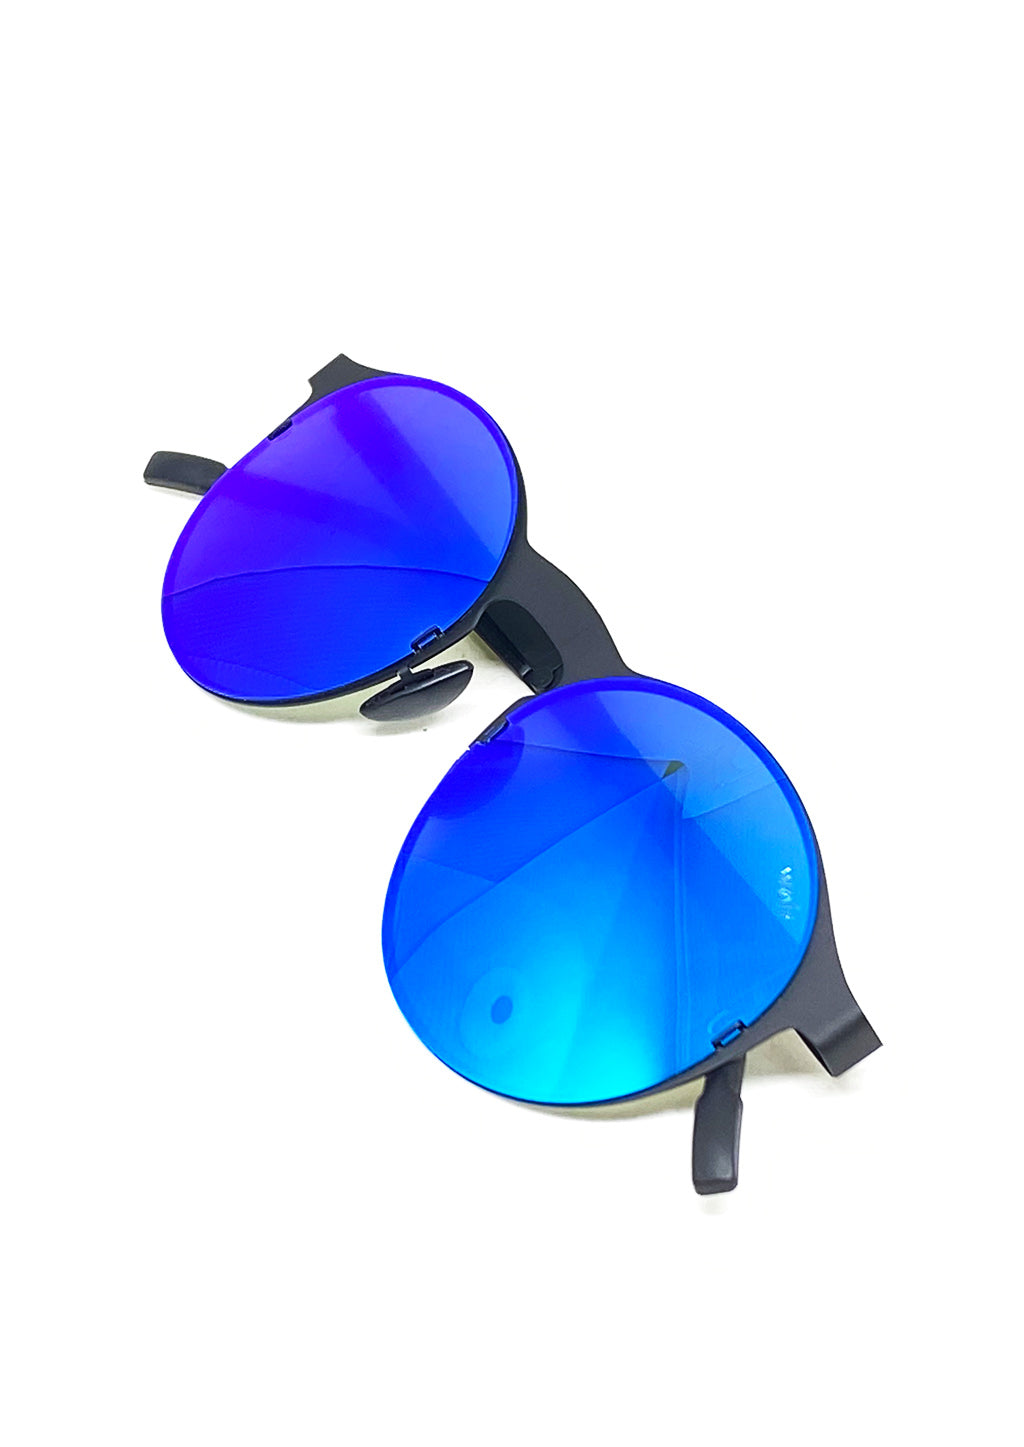 Foldable sunglasses - Looper classic round design - Laying down.